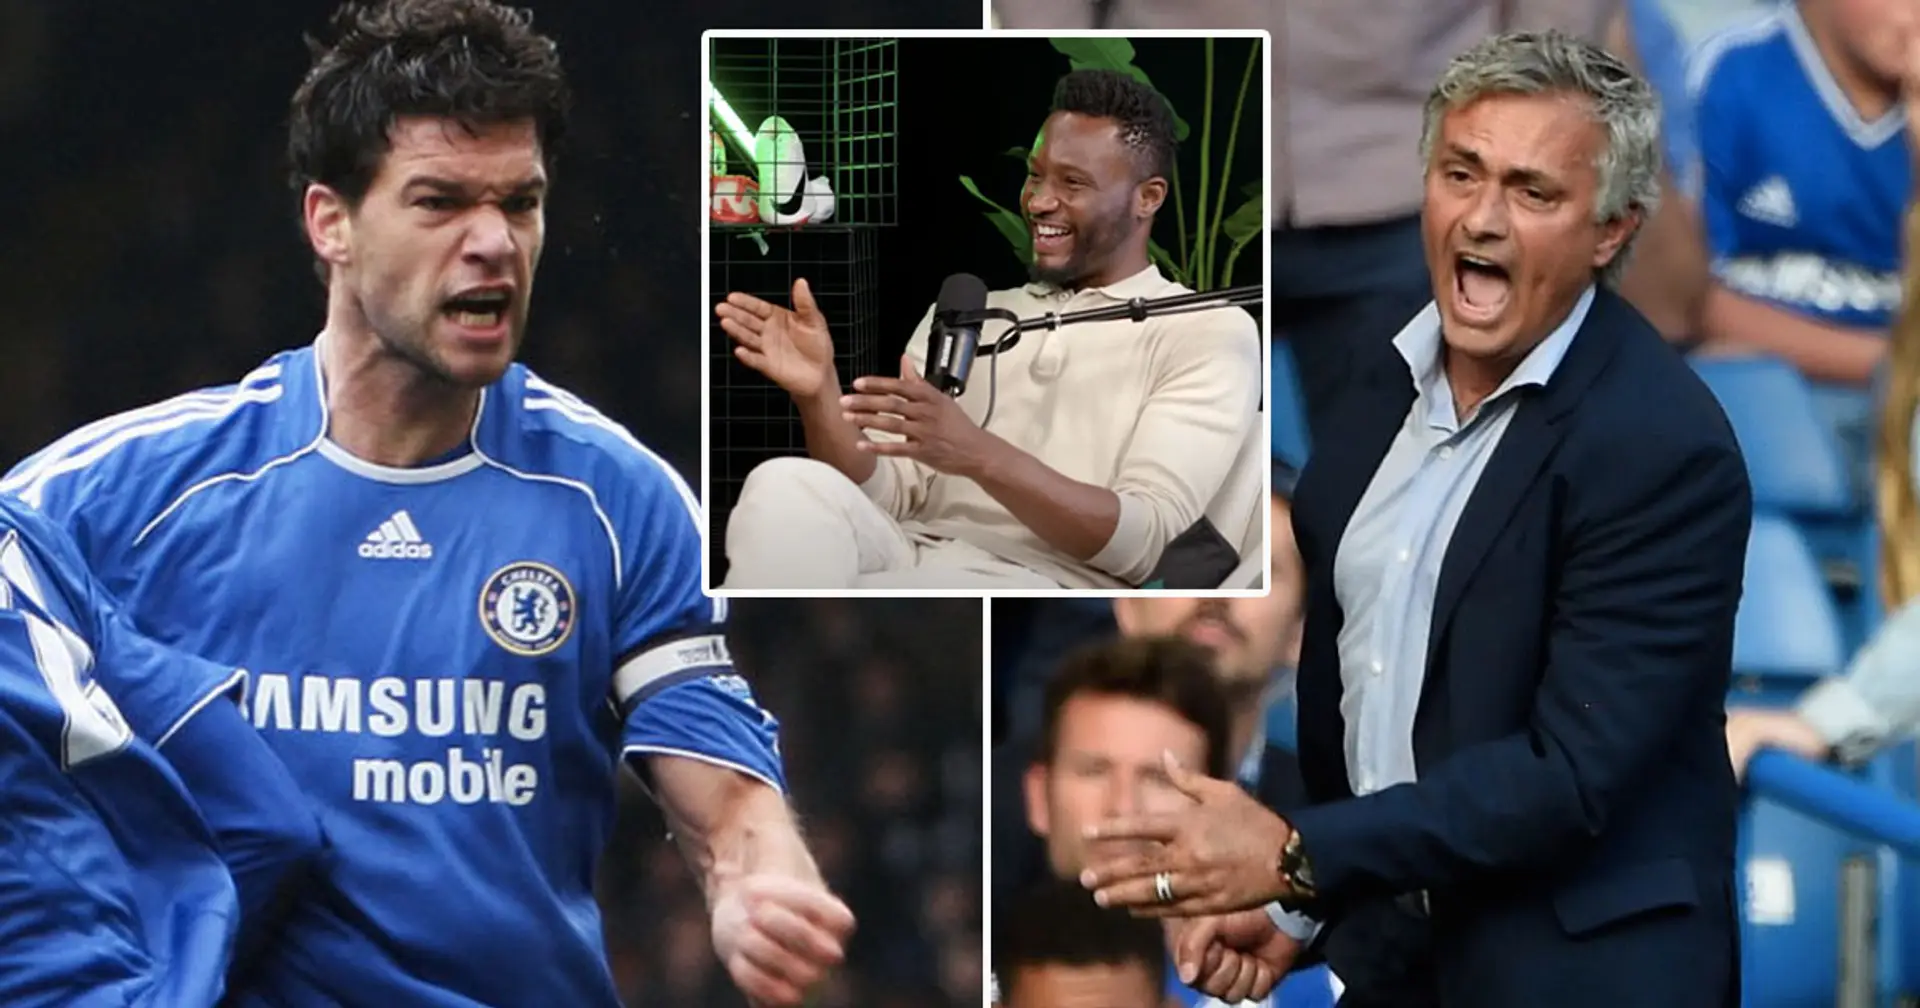 'Don't come to my place!': Obi Mikel reveals Mourinho's hilarious dressing room rant - two stars were on receiving end